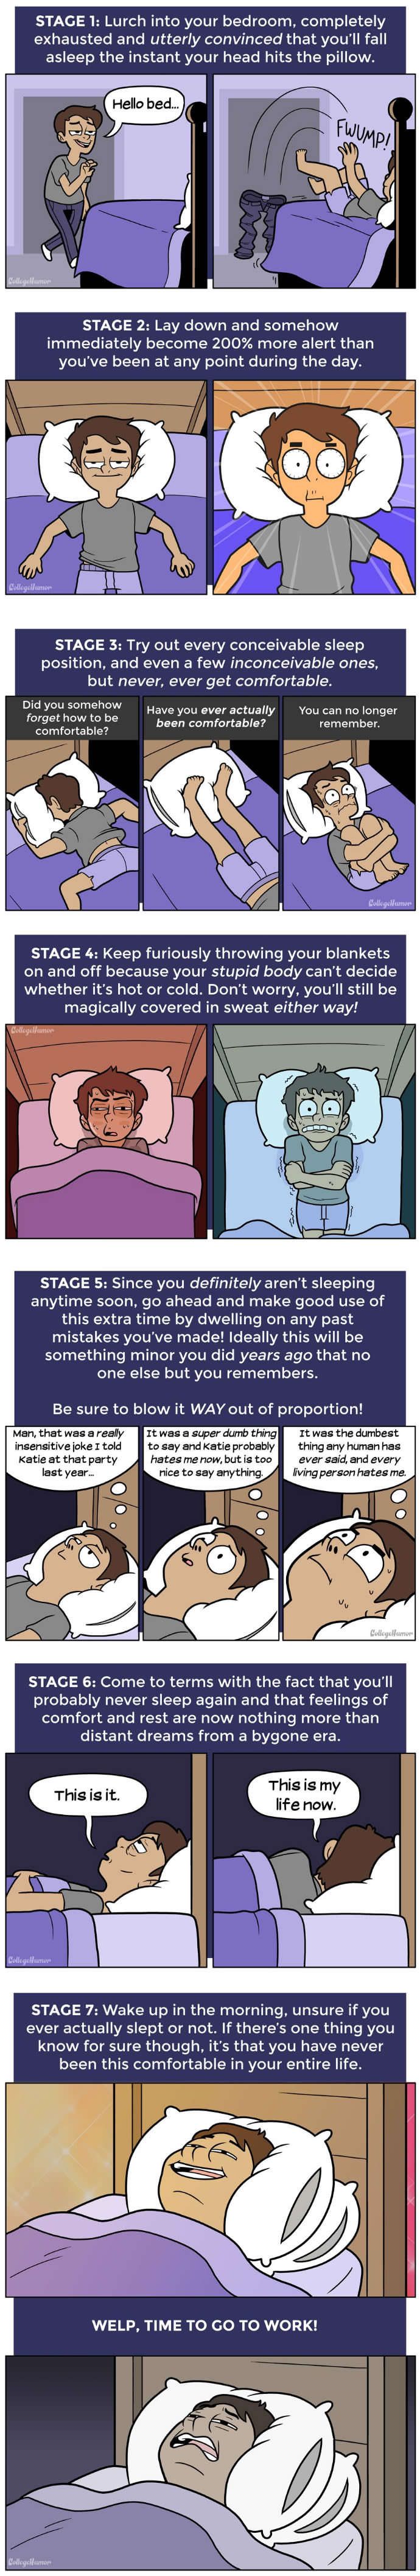 Stages of "Sleep"